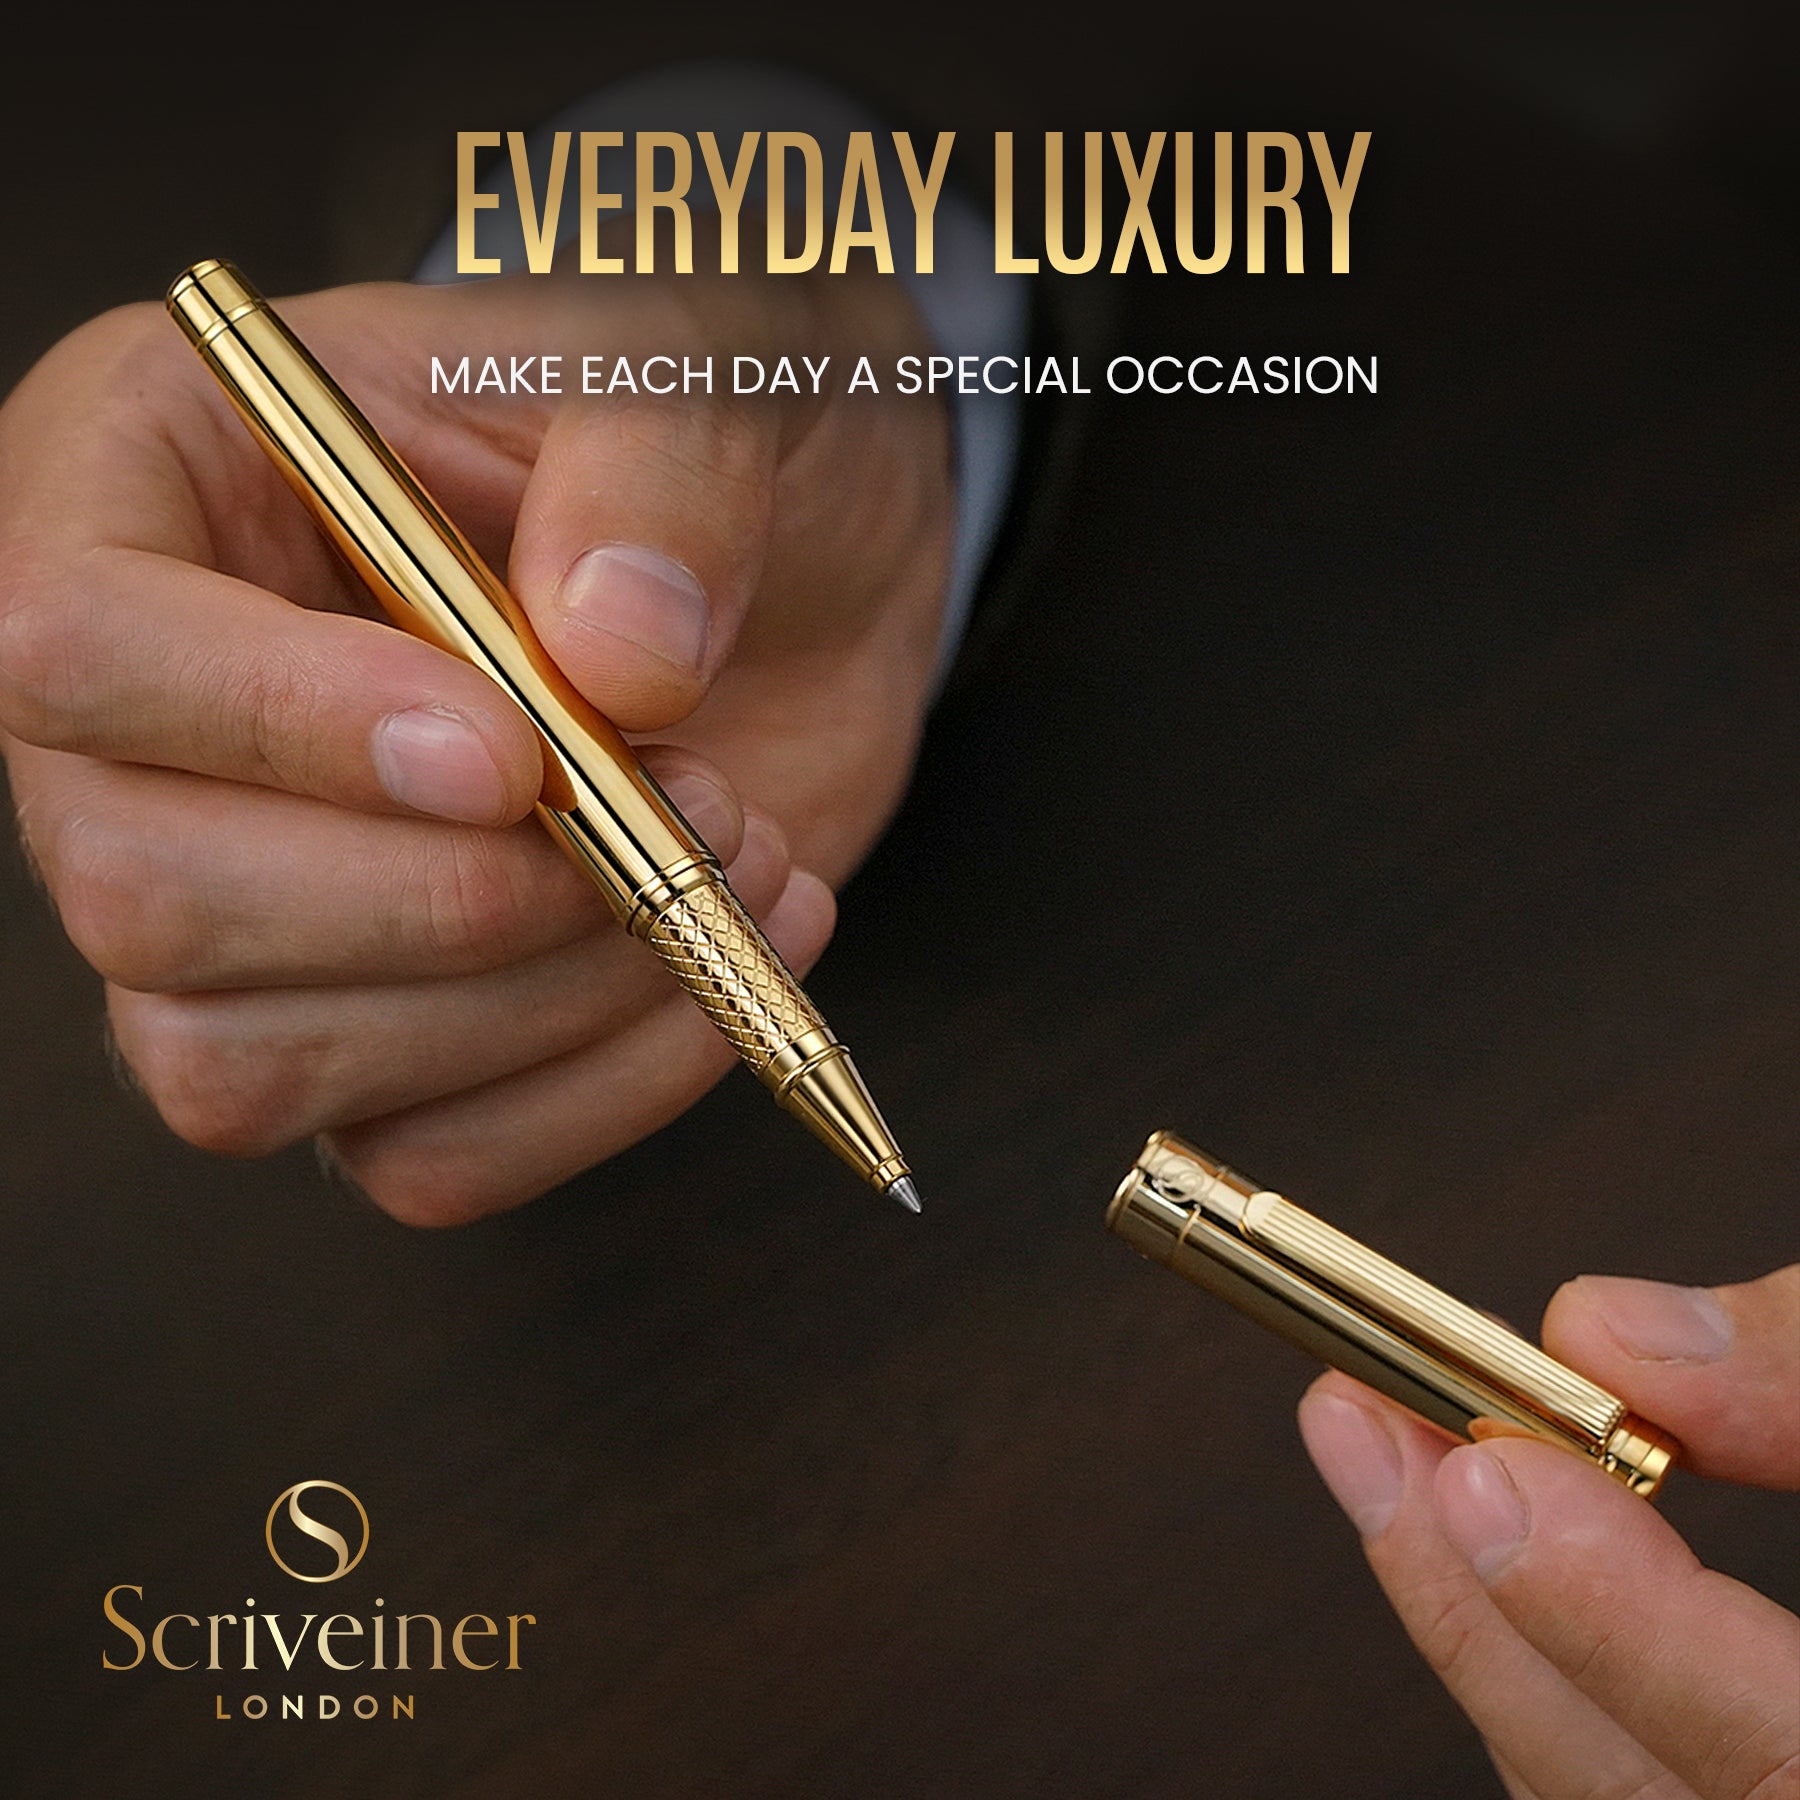 Sheaffer Pens Legacy Prelude Agio Sentinel Sheaffer Circle grip engrave  emblem engraving USA made in America award delta grip Nononsense phorm  Fountain pen ballpen writing instruments Promotional Products Corporate  Business Gifts source